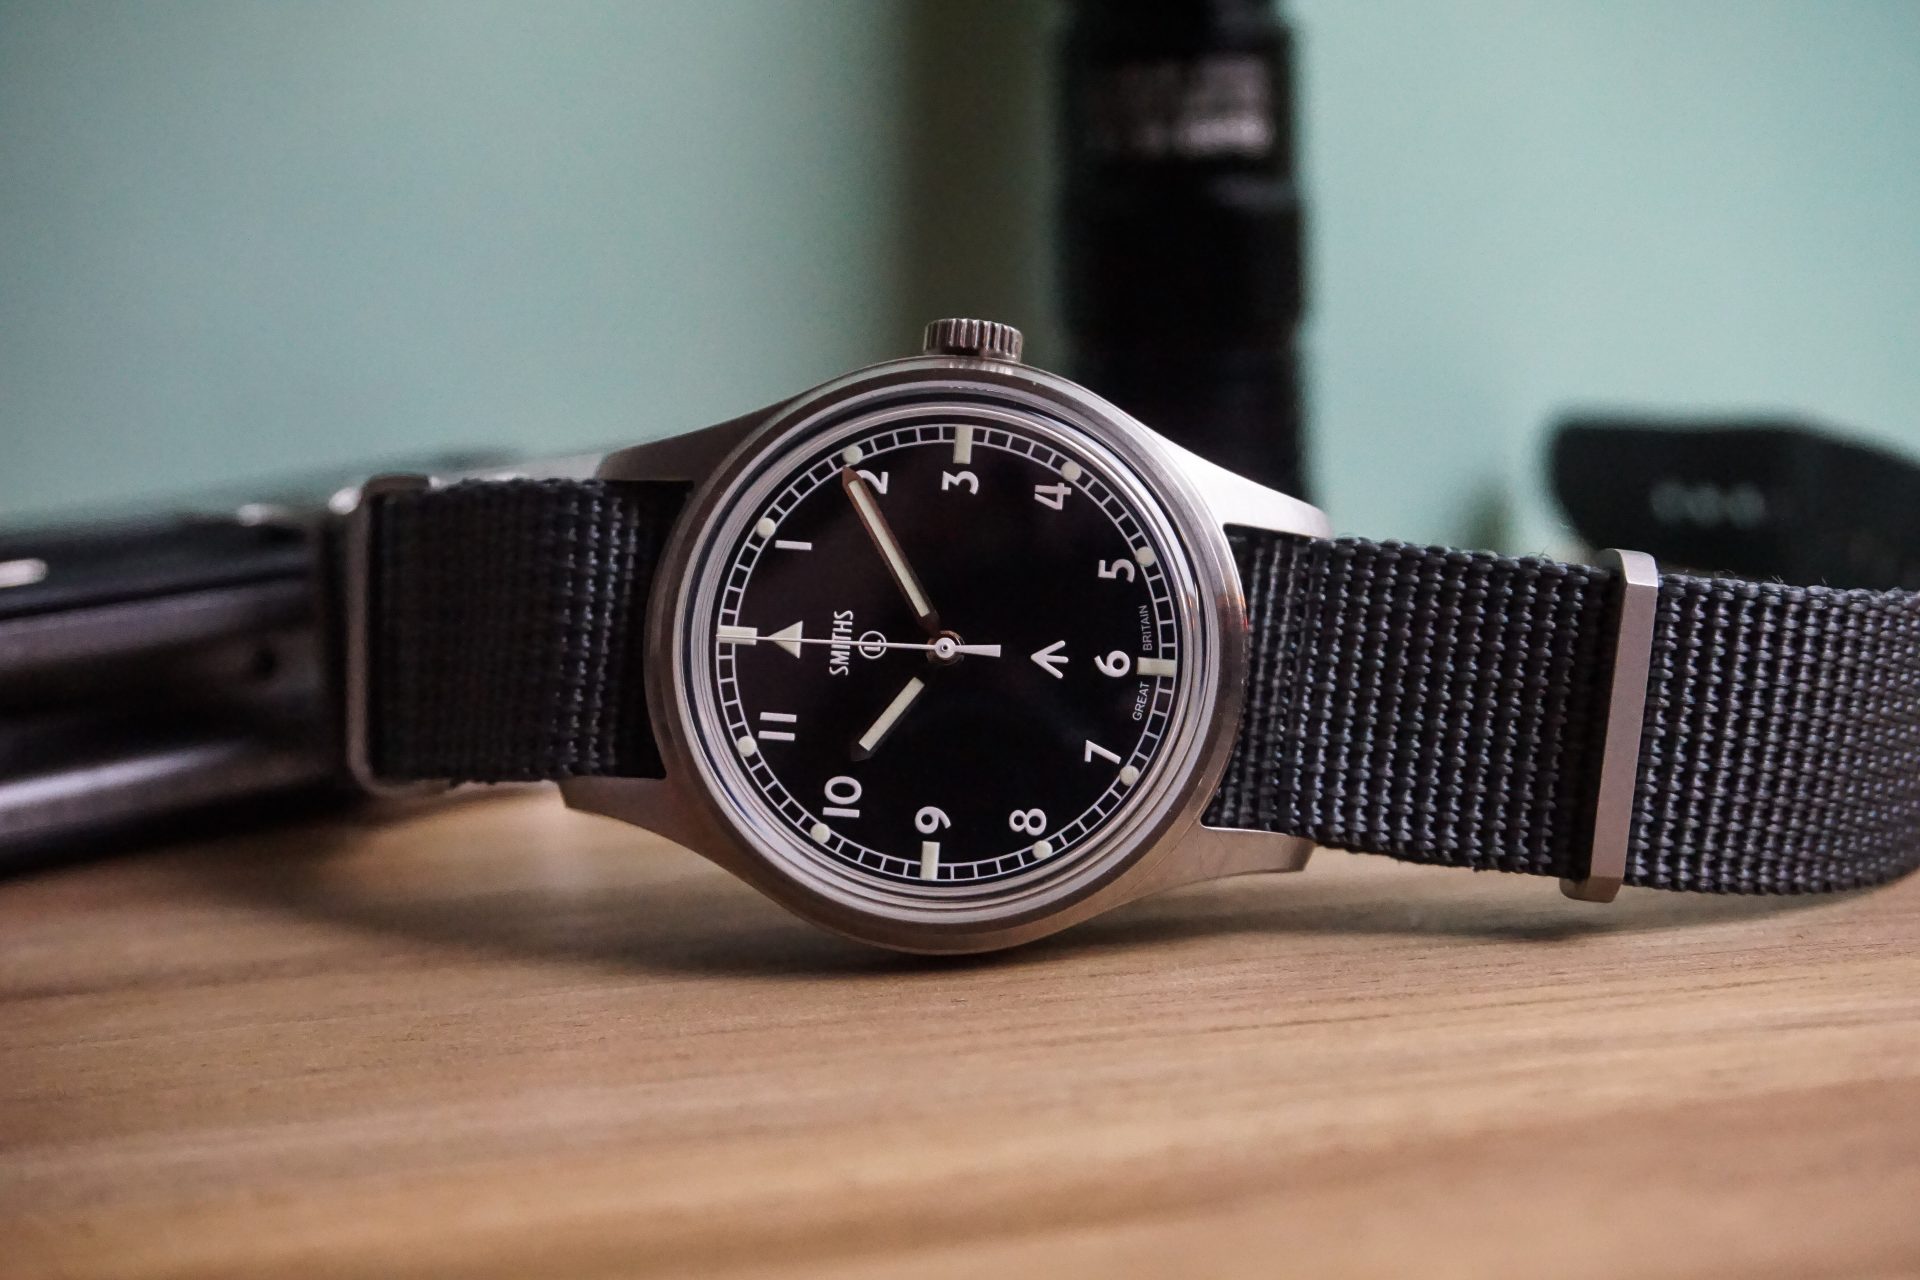 Hands On Review: Timefactors Smiths PRS29 - 12&60